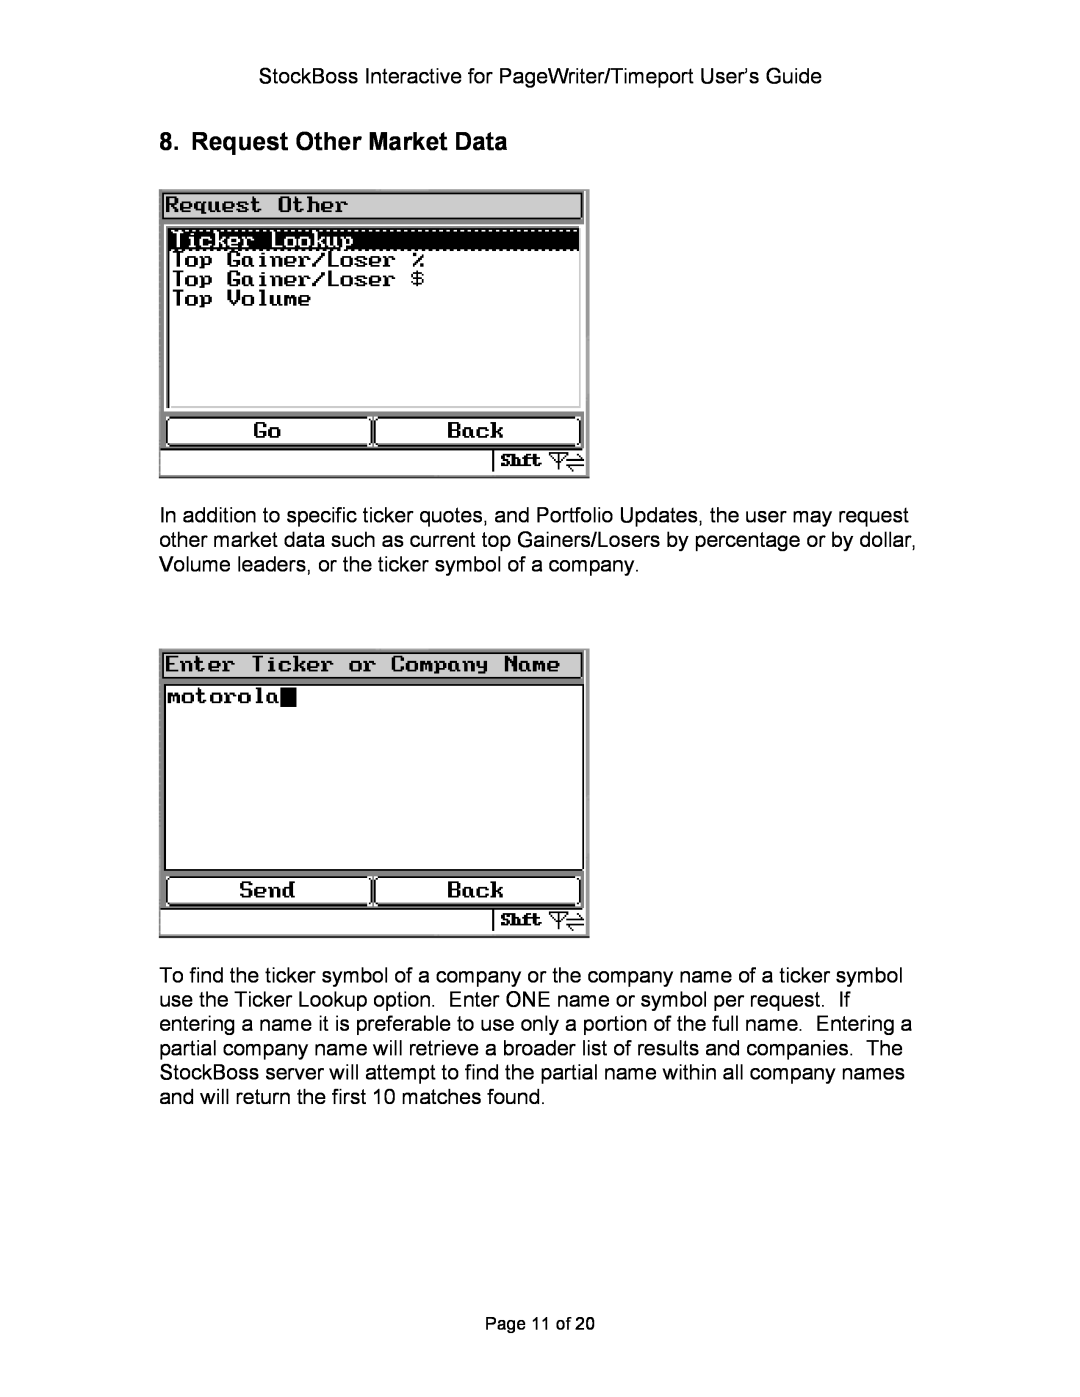 Motorola P930 Series manual Request Other Market Data, Page 11 of 